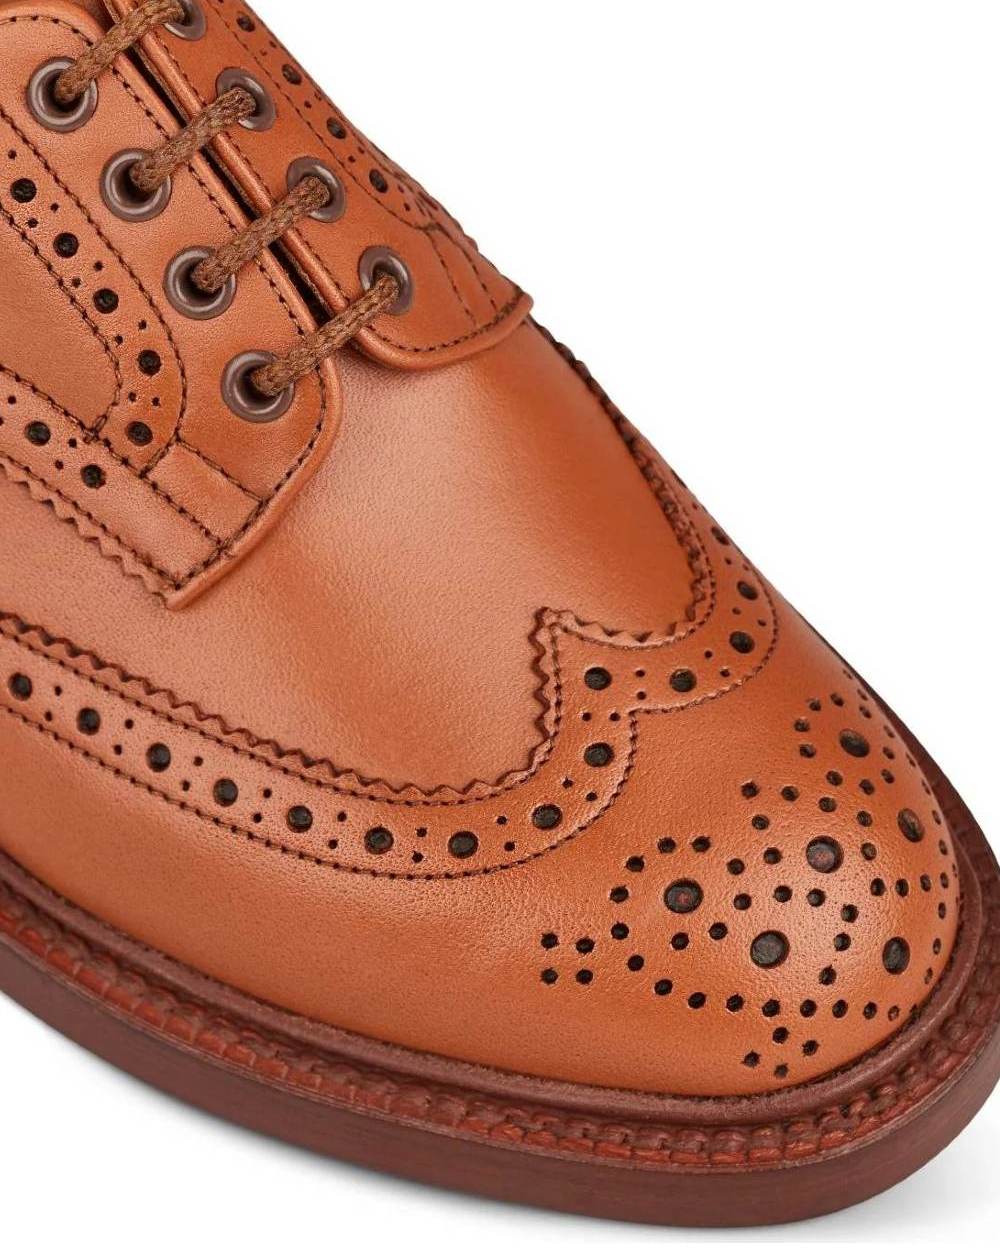 Tan Coloured Trickers Bourton Leather Sole Country Shoe On A White Background 